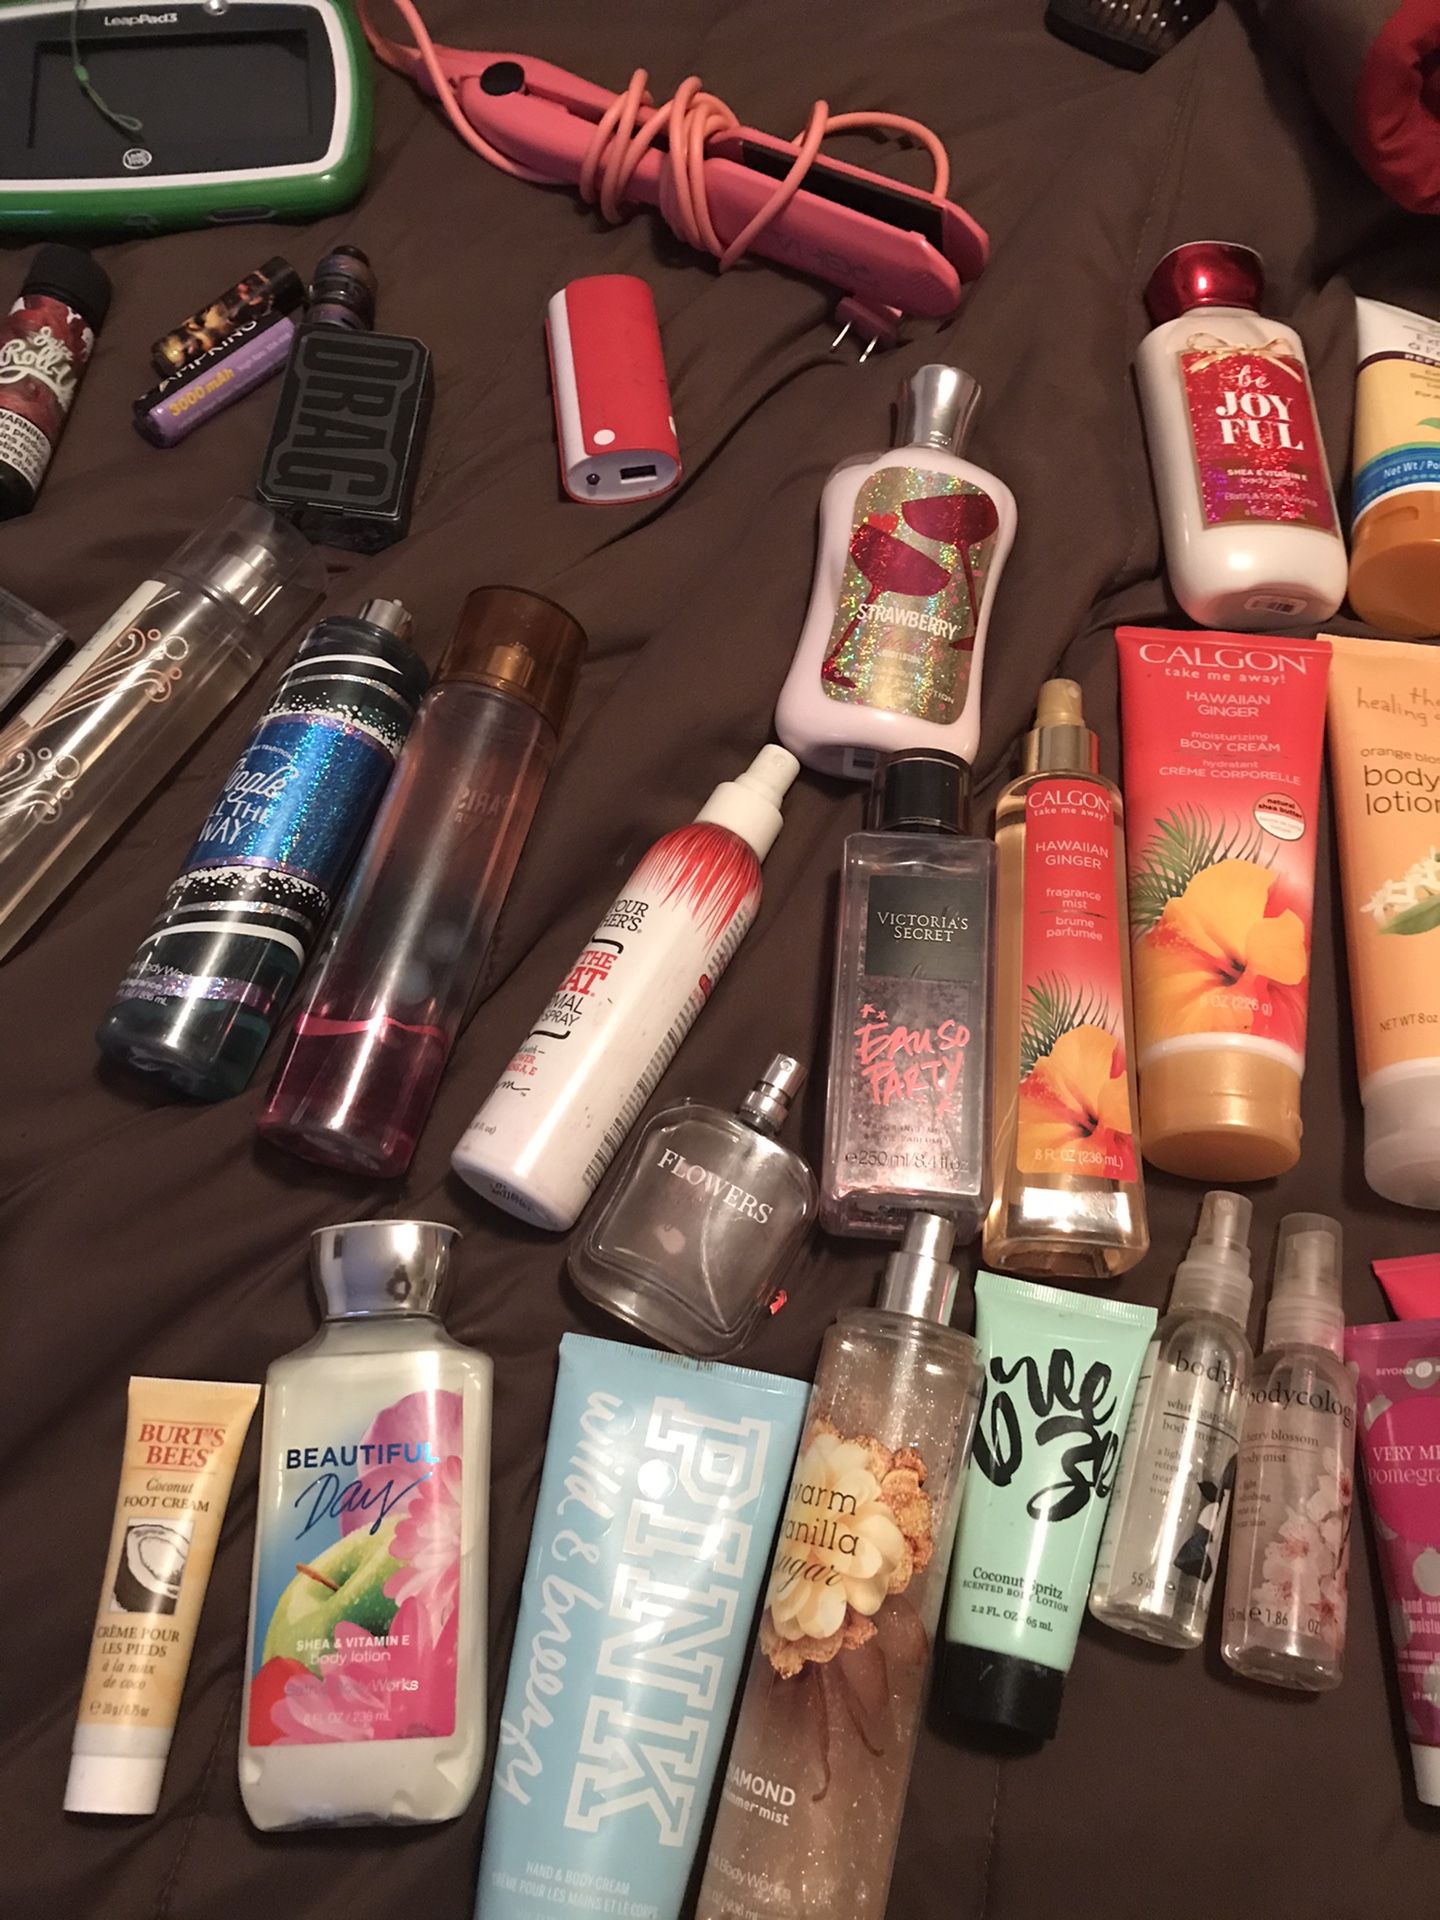 Pink and bbw spray and lotions